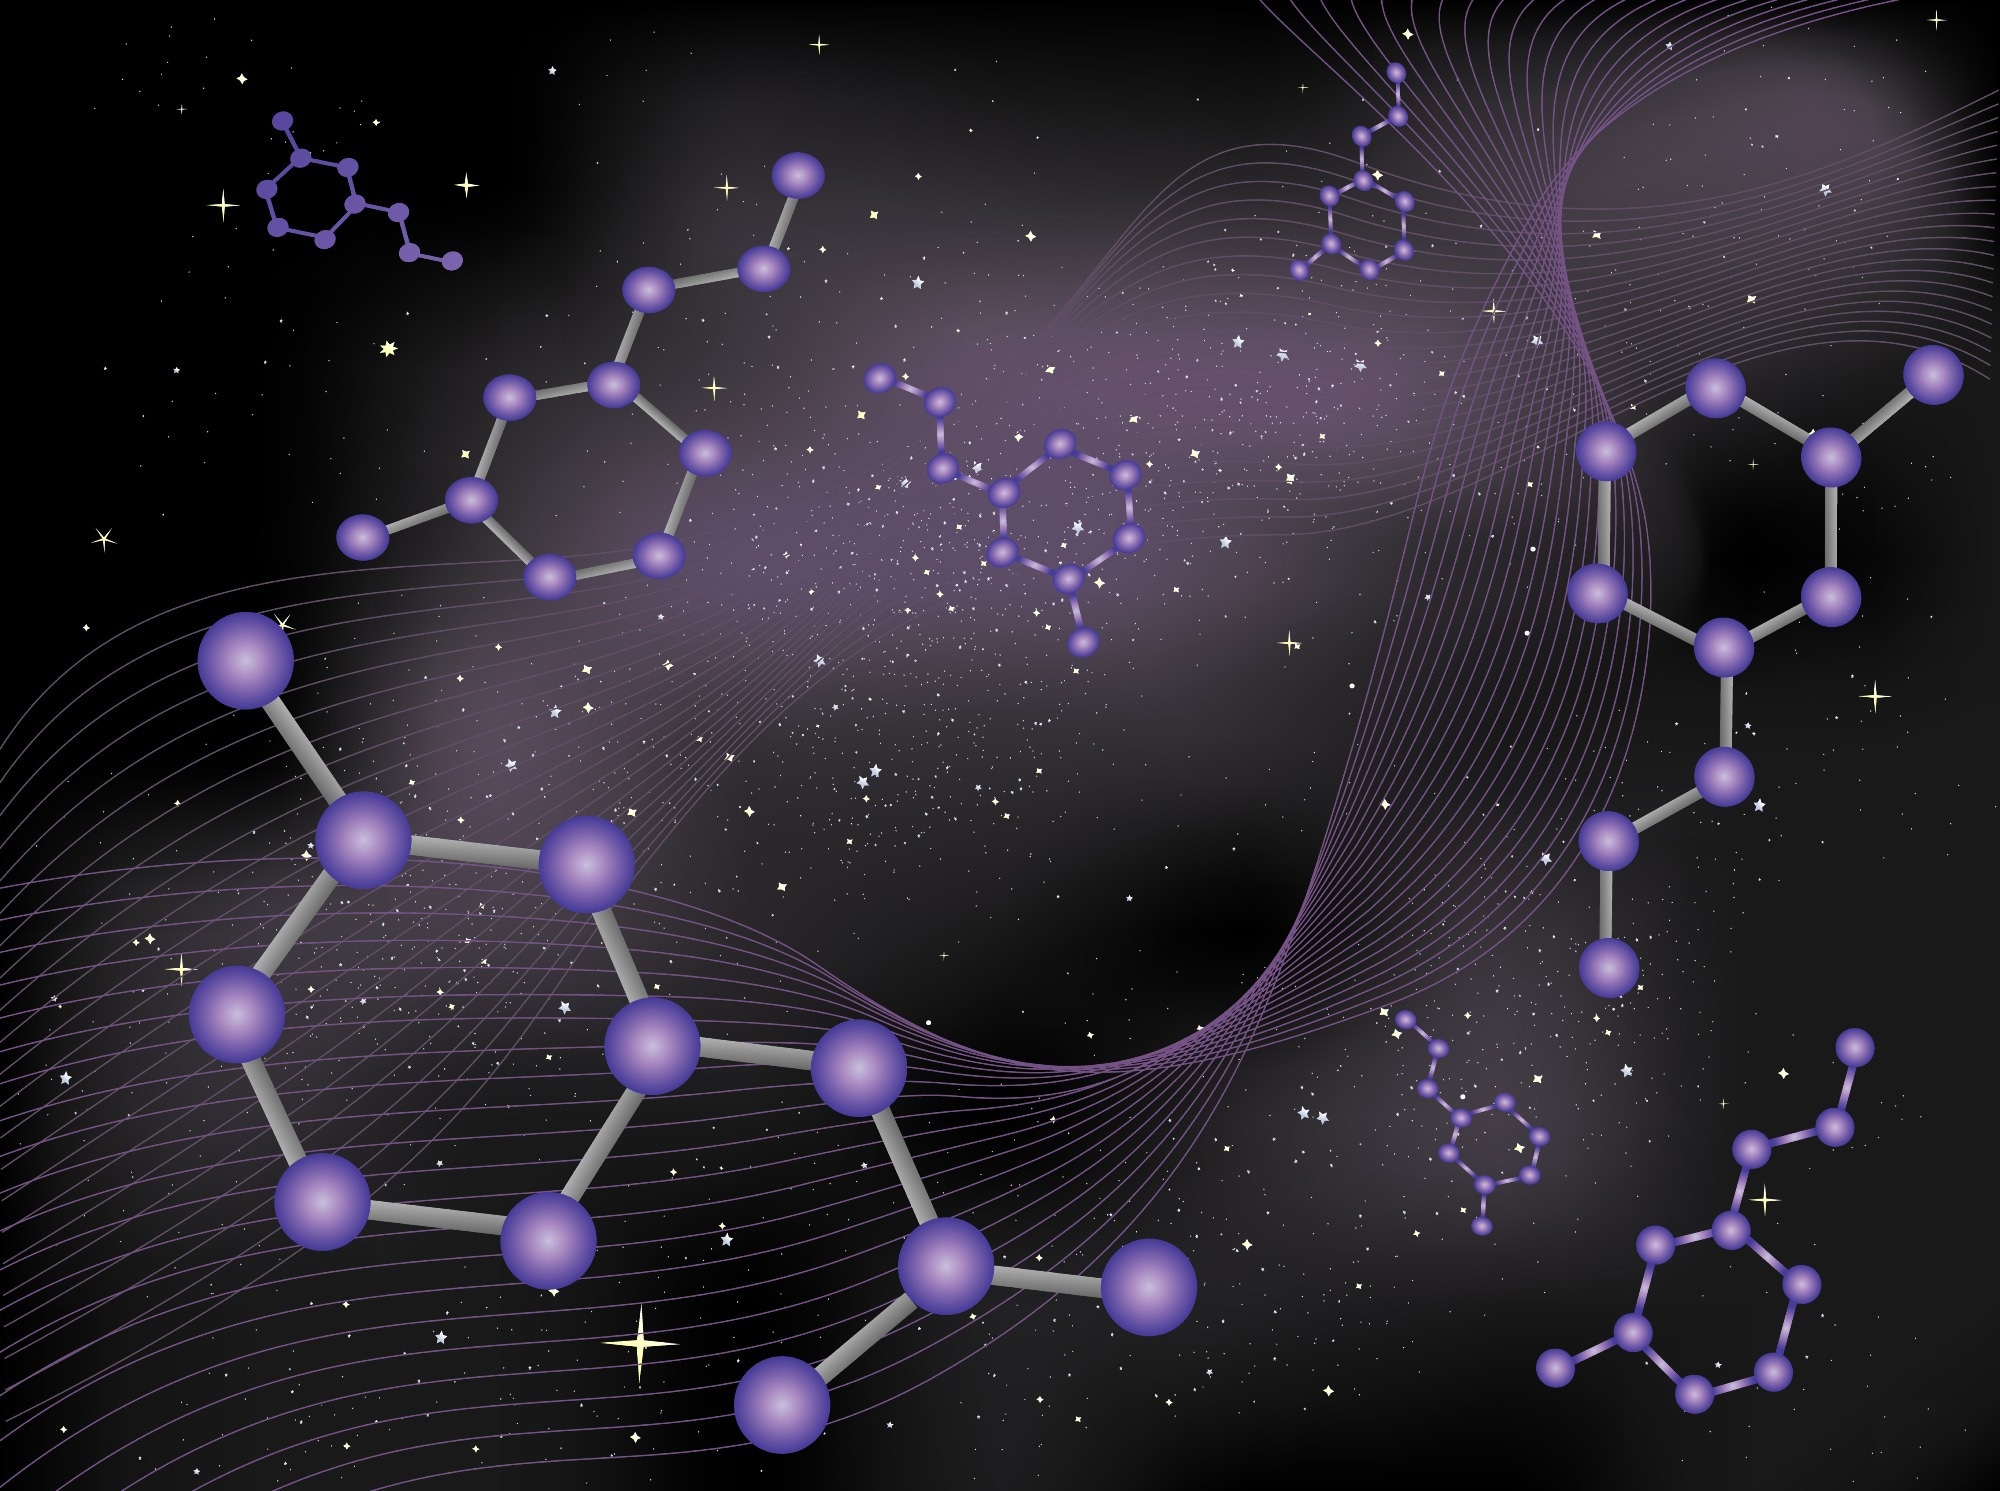 Abstract depiction of molecules drifting in deep space